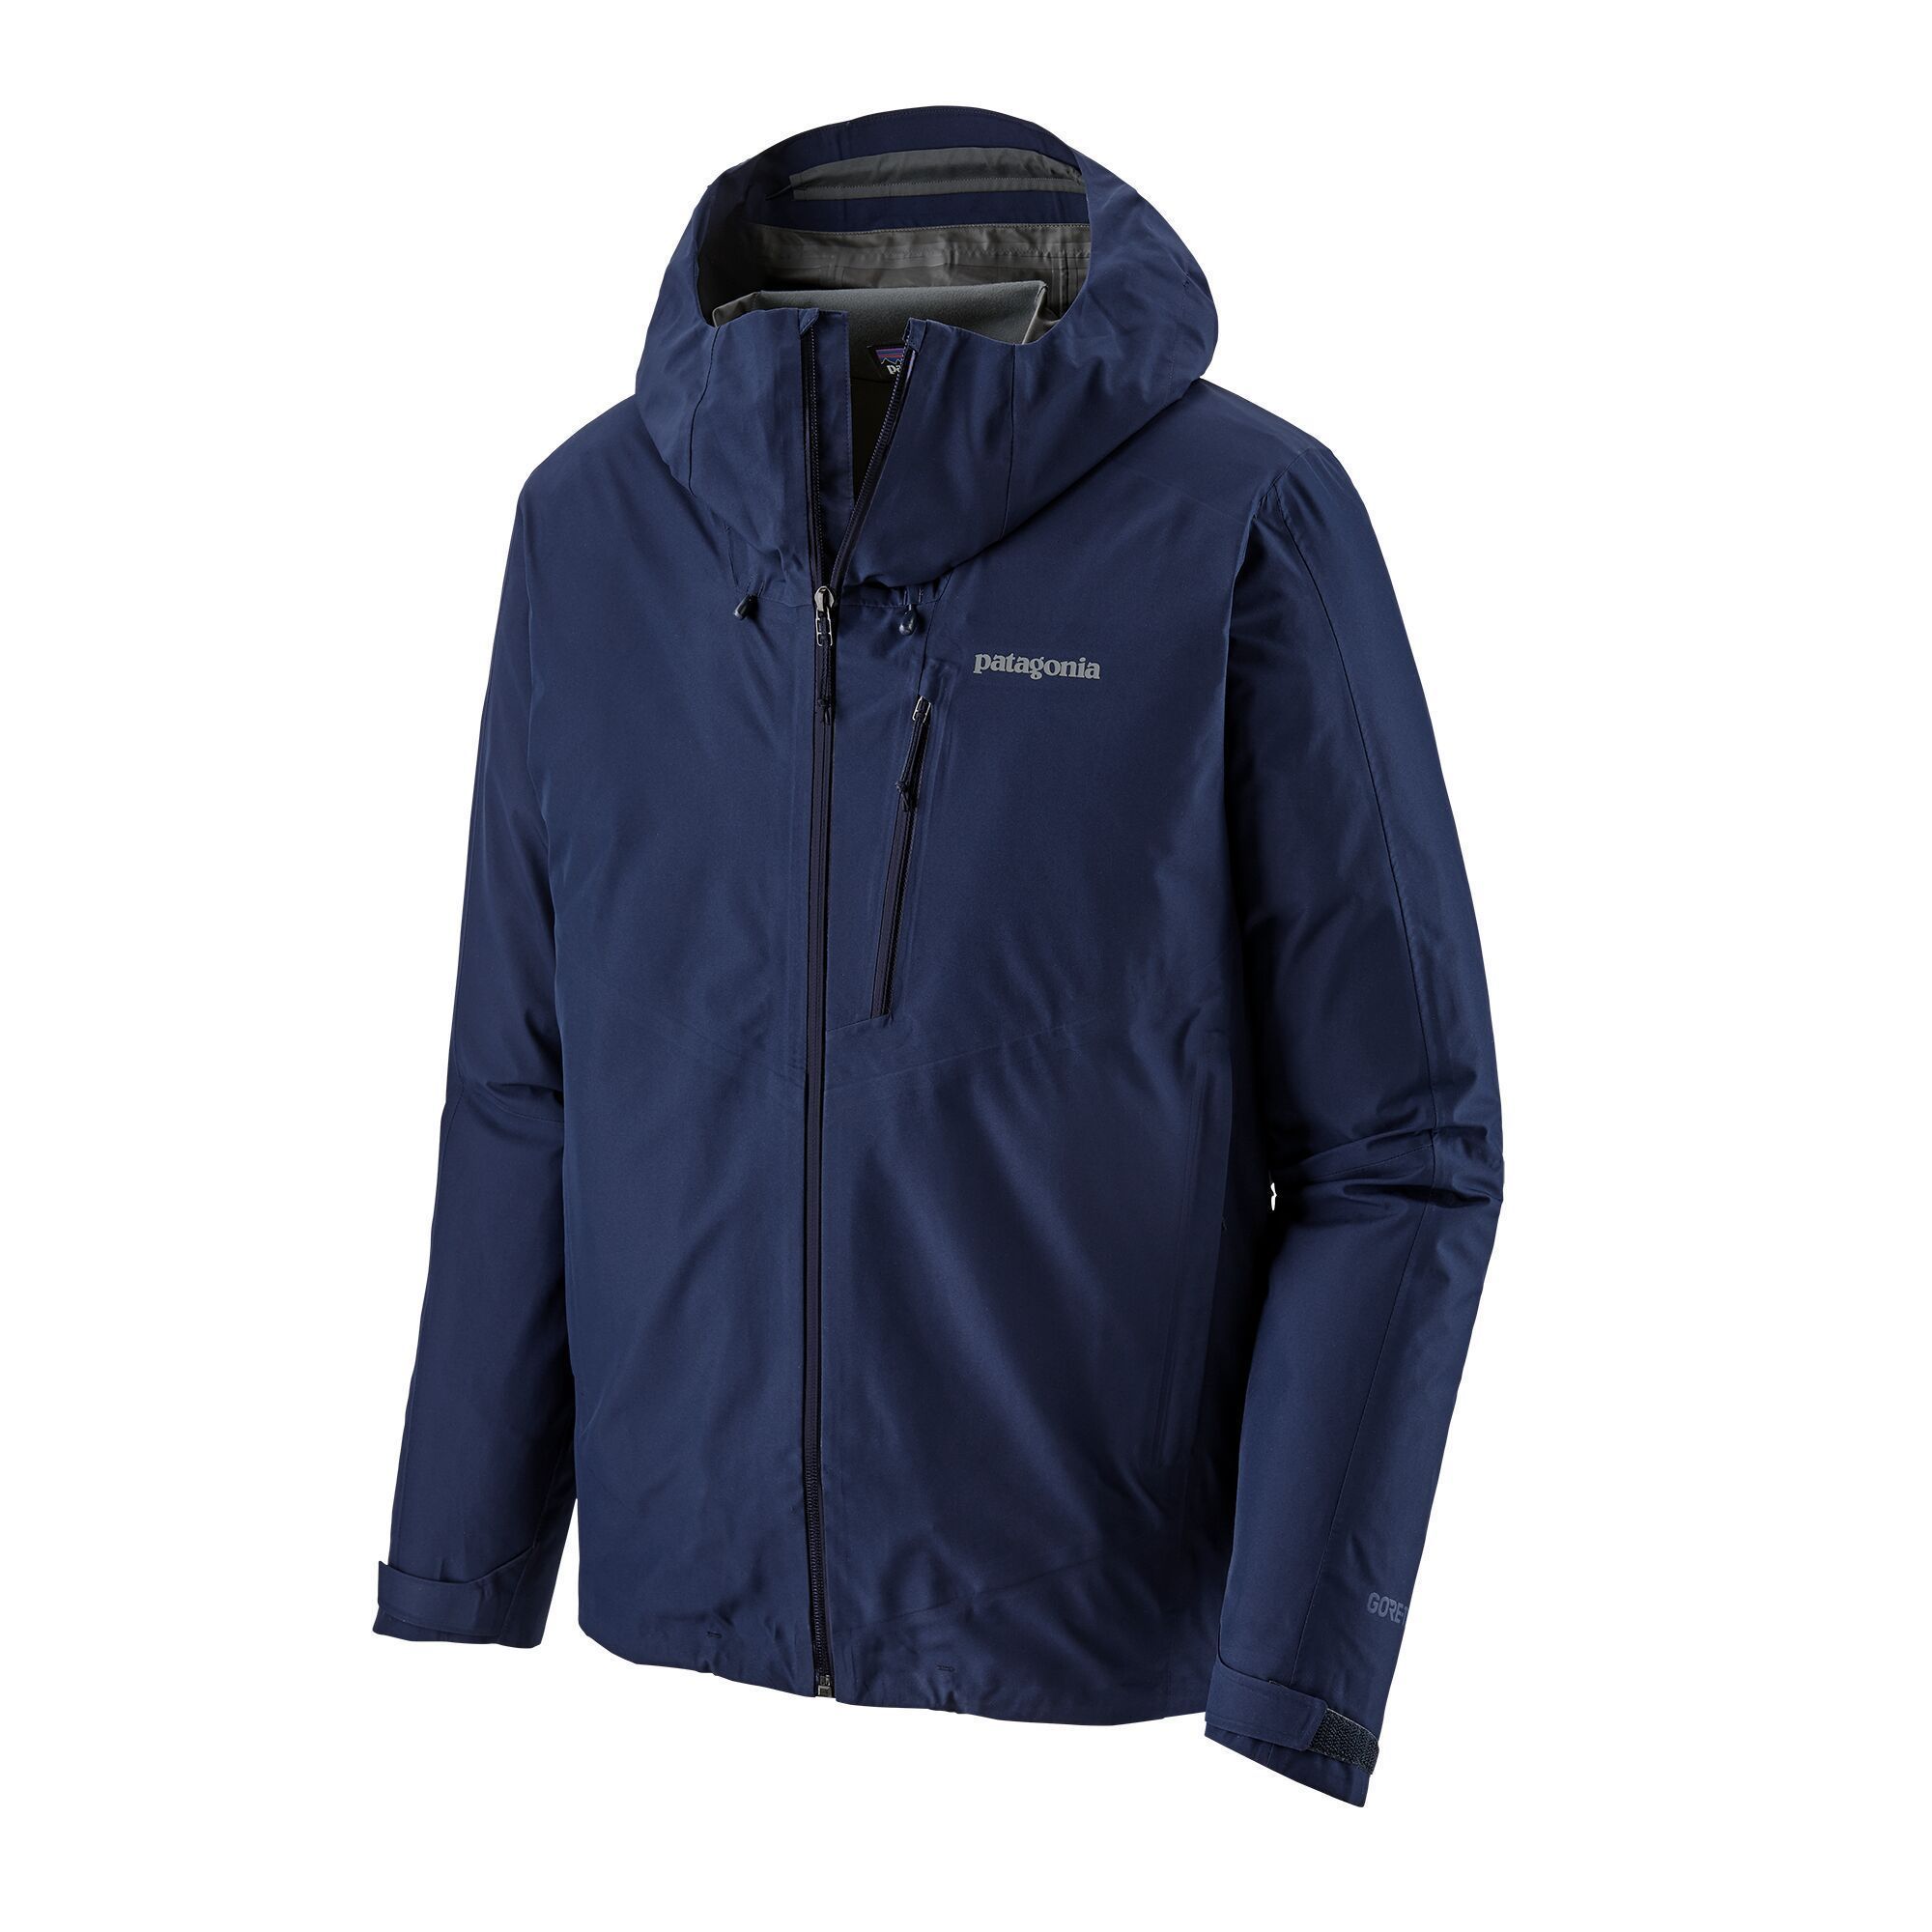 Patagonia Men's Calcite Shell Jacket - Gore-Tex - 100% Recycled Polyester, Classic Navy / S